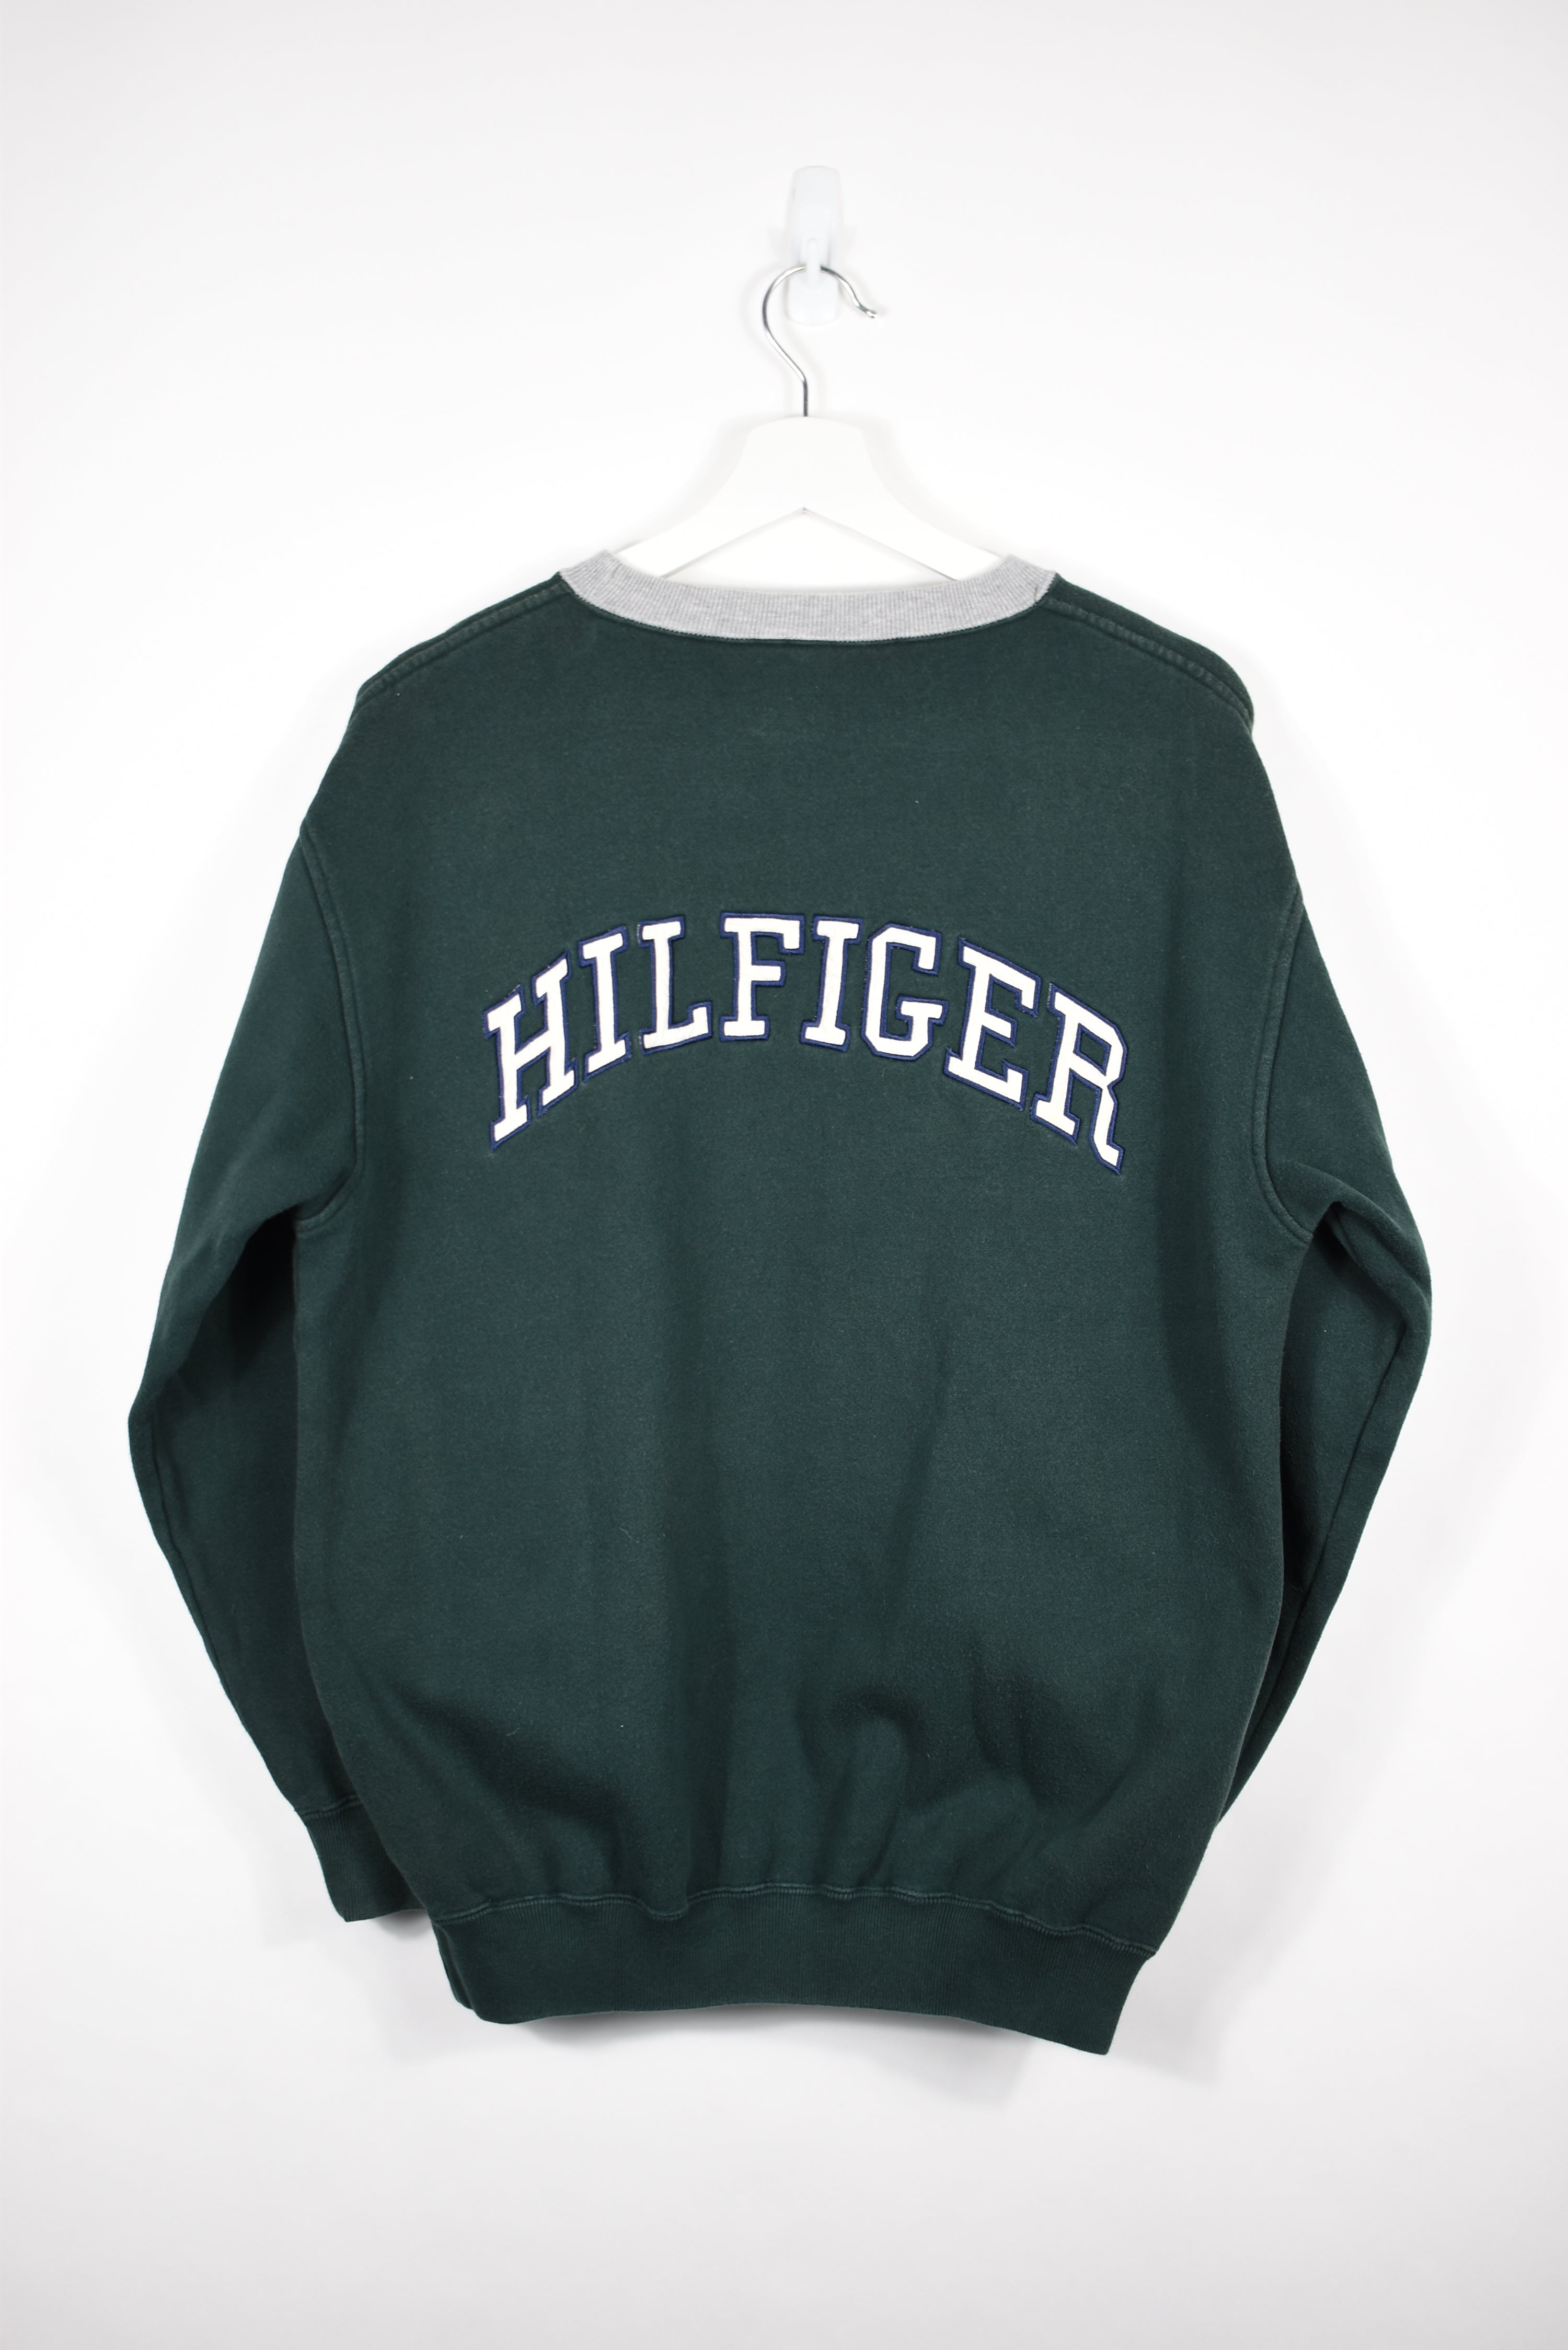 Vintage Tommy Hilfiger Double-Sided Embroidery Sweatshirt LARGE